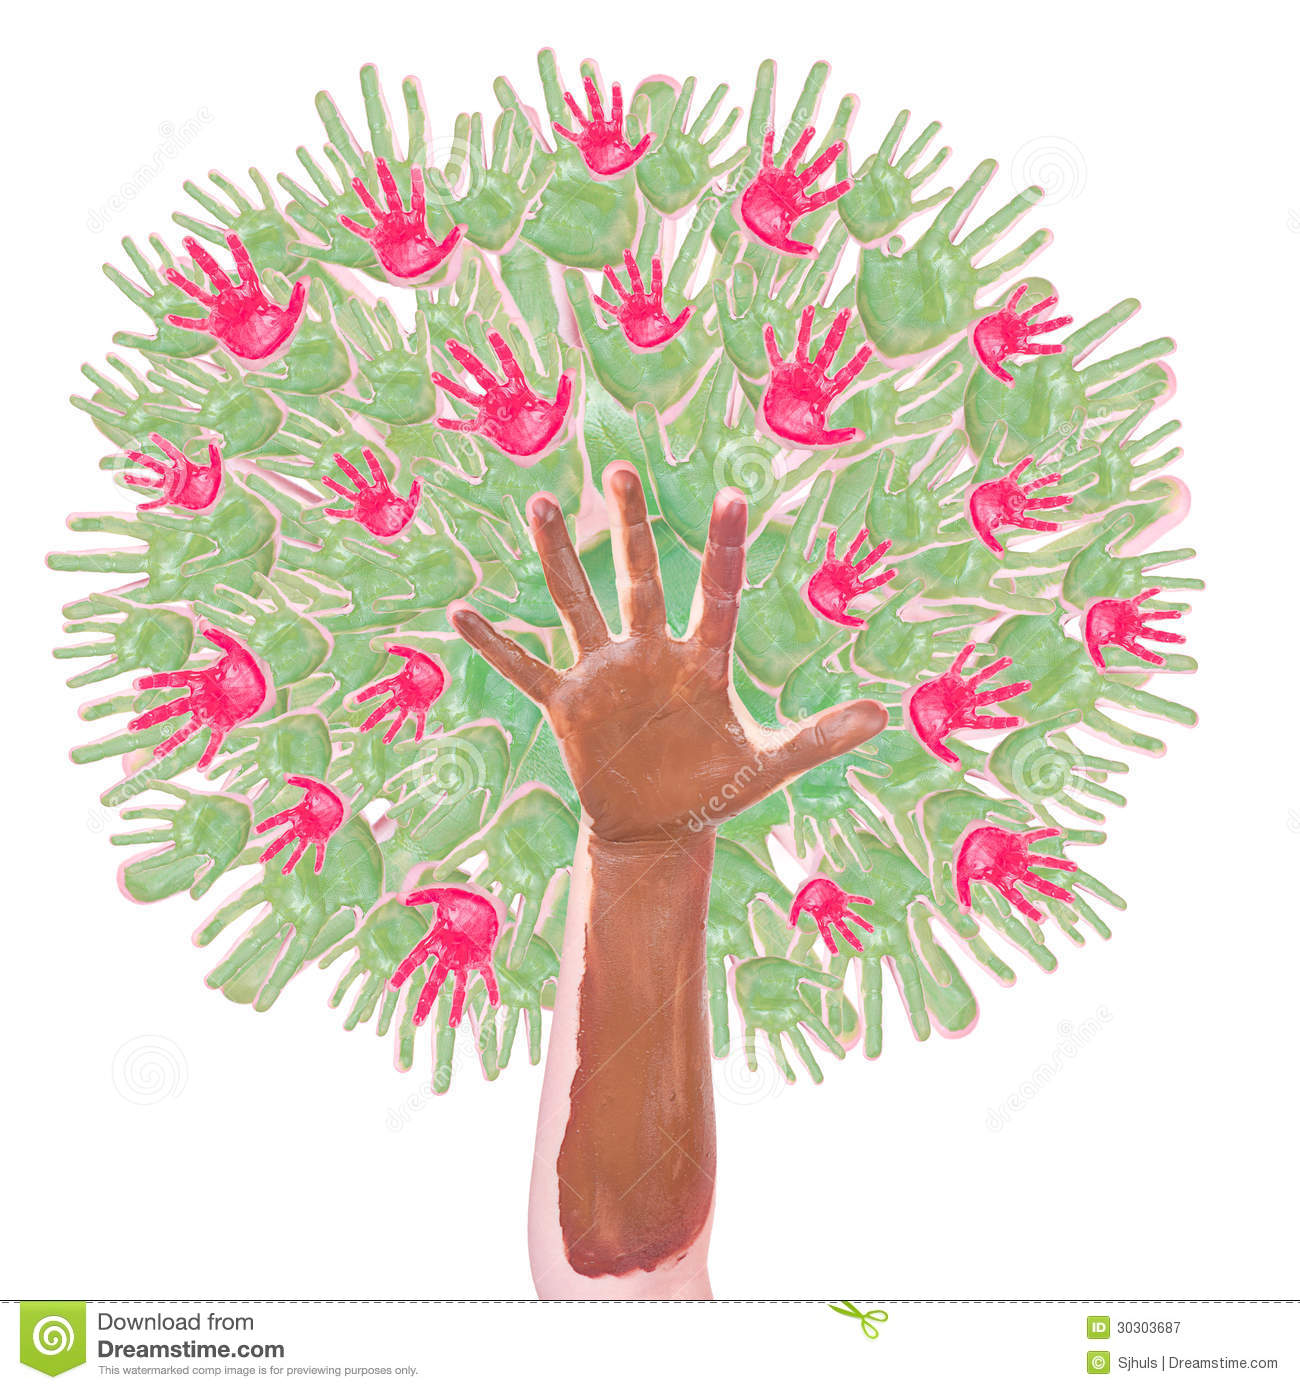 Apple Tree Made Of Childrens Hands Royalty Free Stock Photography